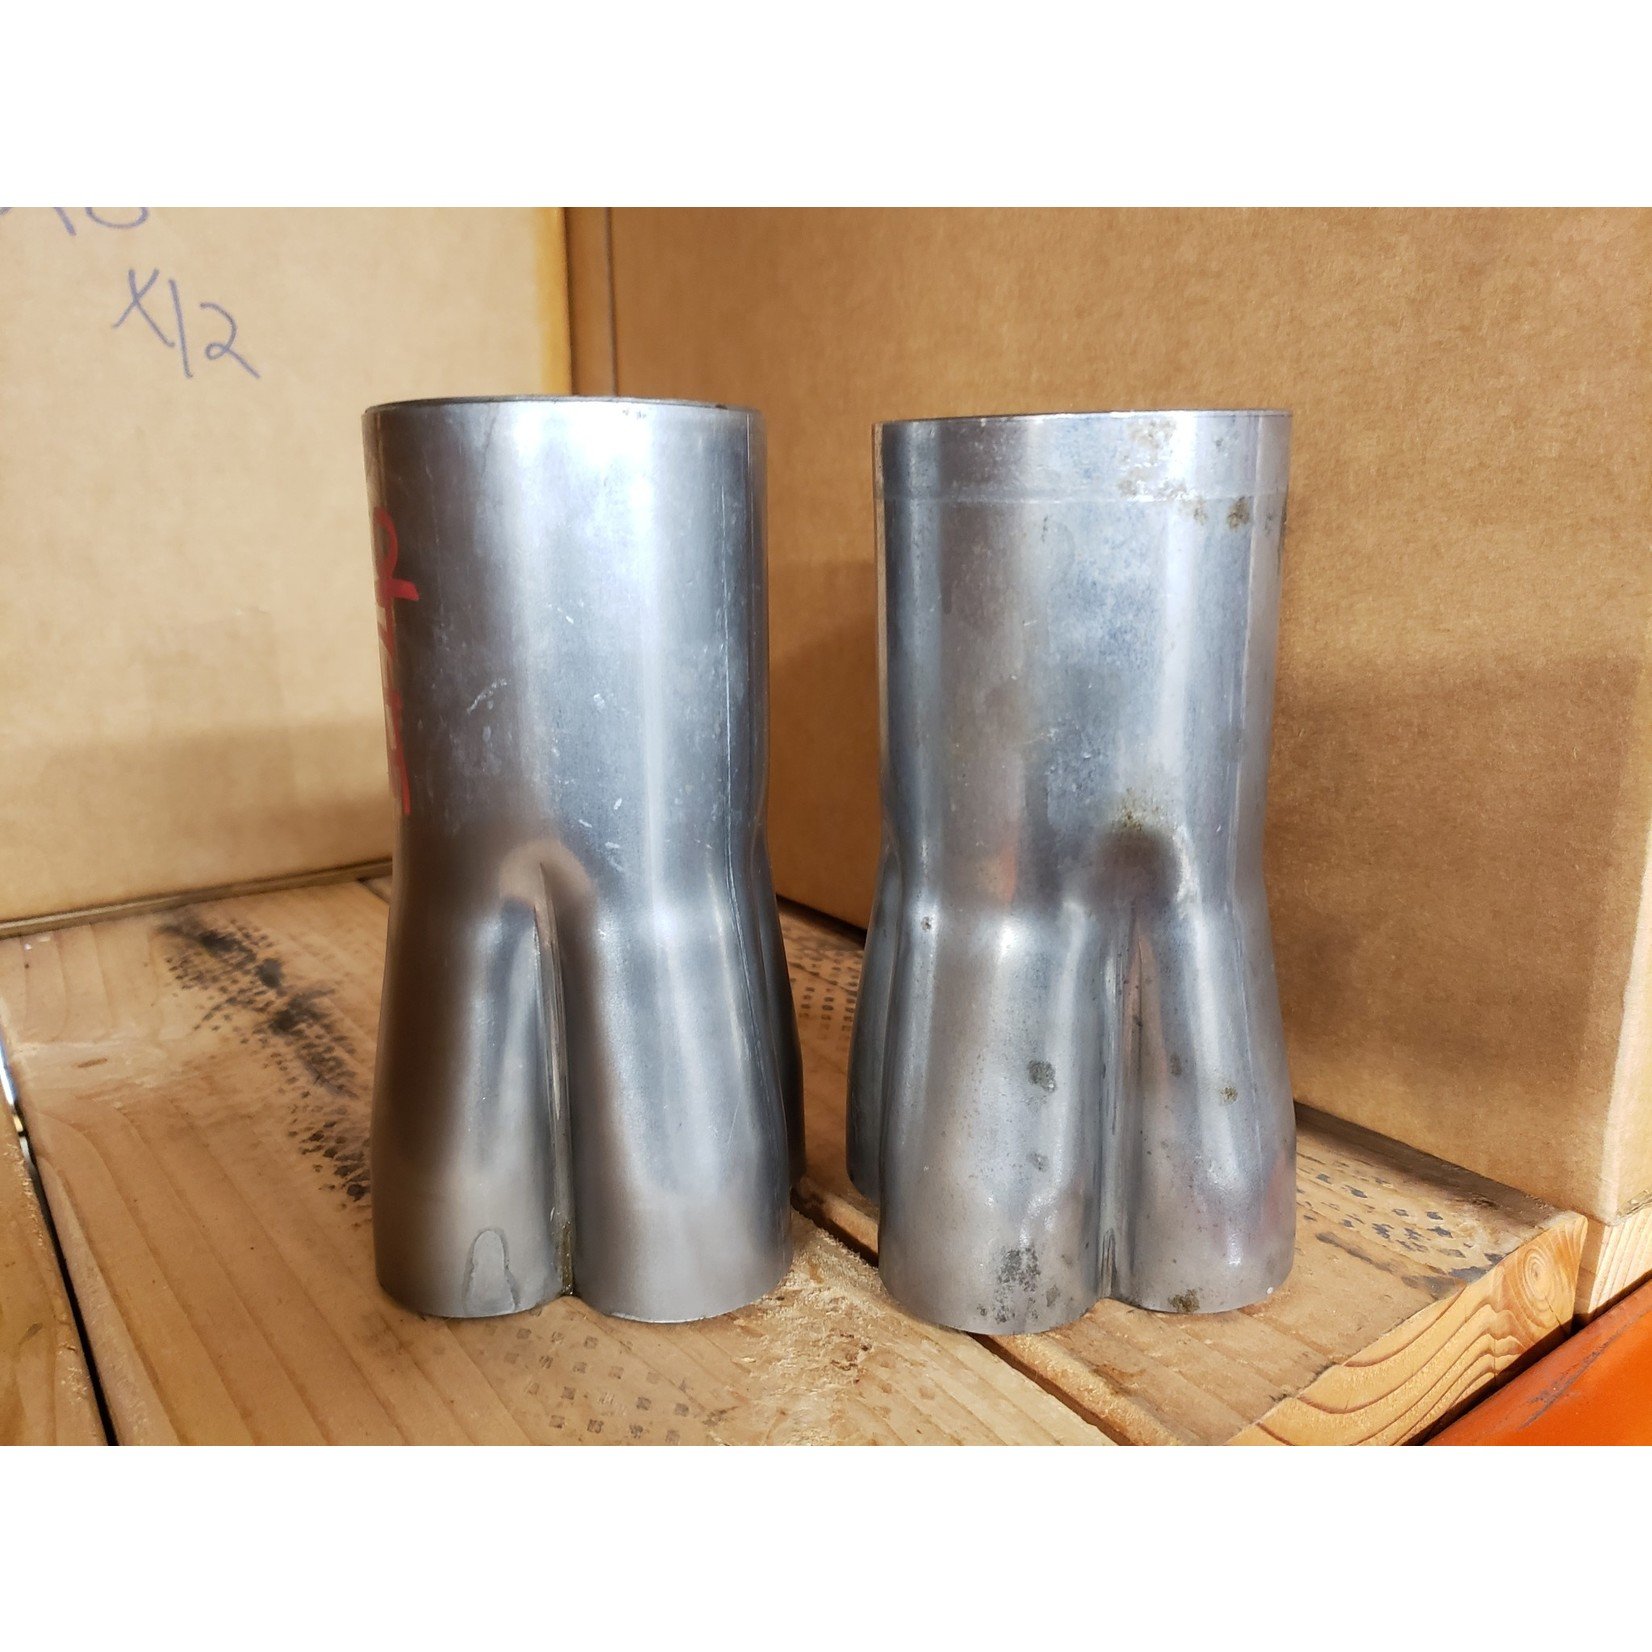 PAIR -GBE STEEL WELD-ON HEADER COLLECTOR, 1-5/8 O.D. PRIMARIES 3" OD OUTLET 5-1/2" +  LONG